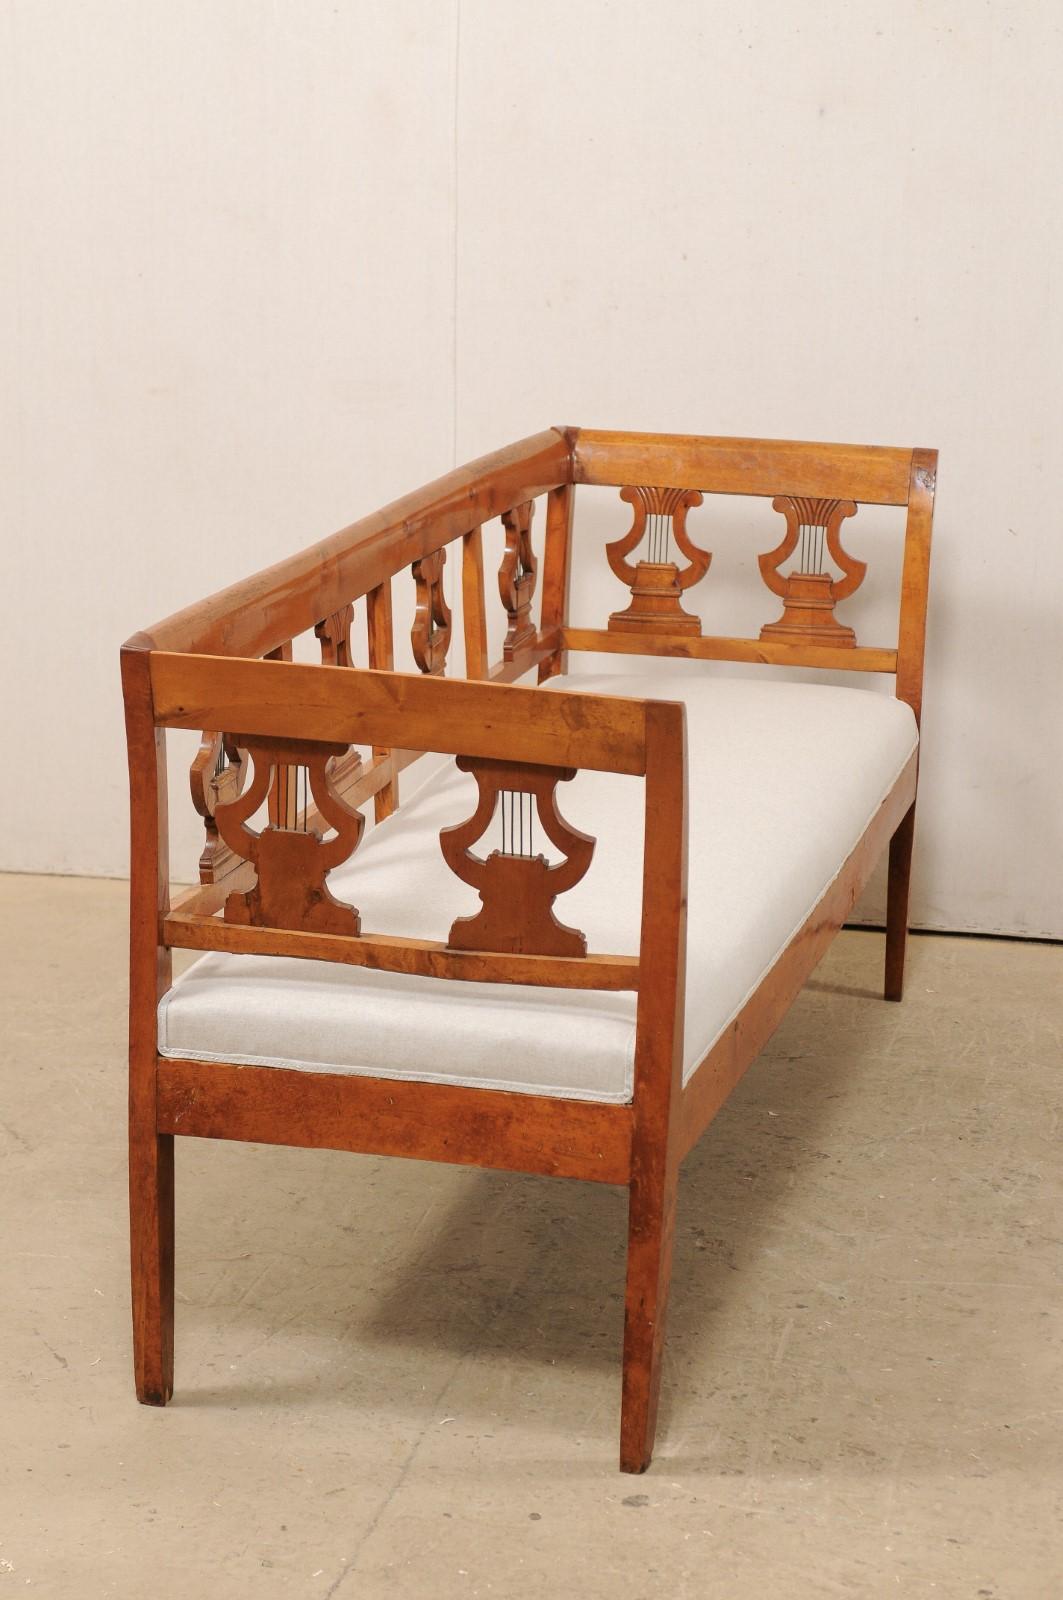 19th Century Swedish Neoclassical Style Birchwood Sofa Bench with Lyre Carvings, Mid-19th C